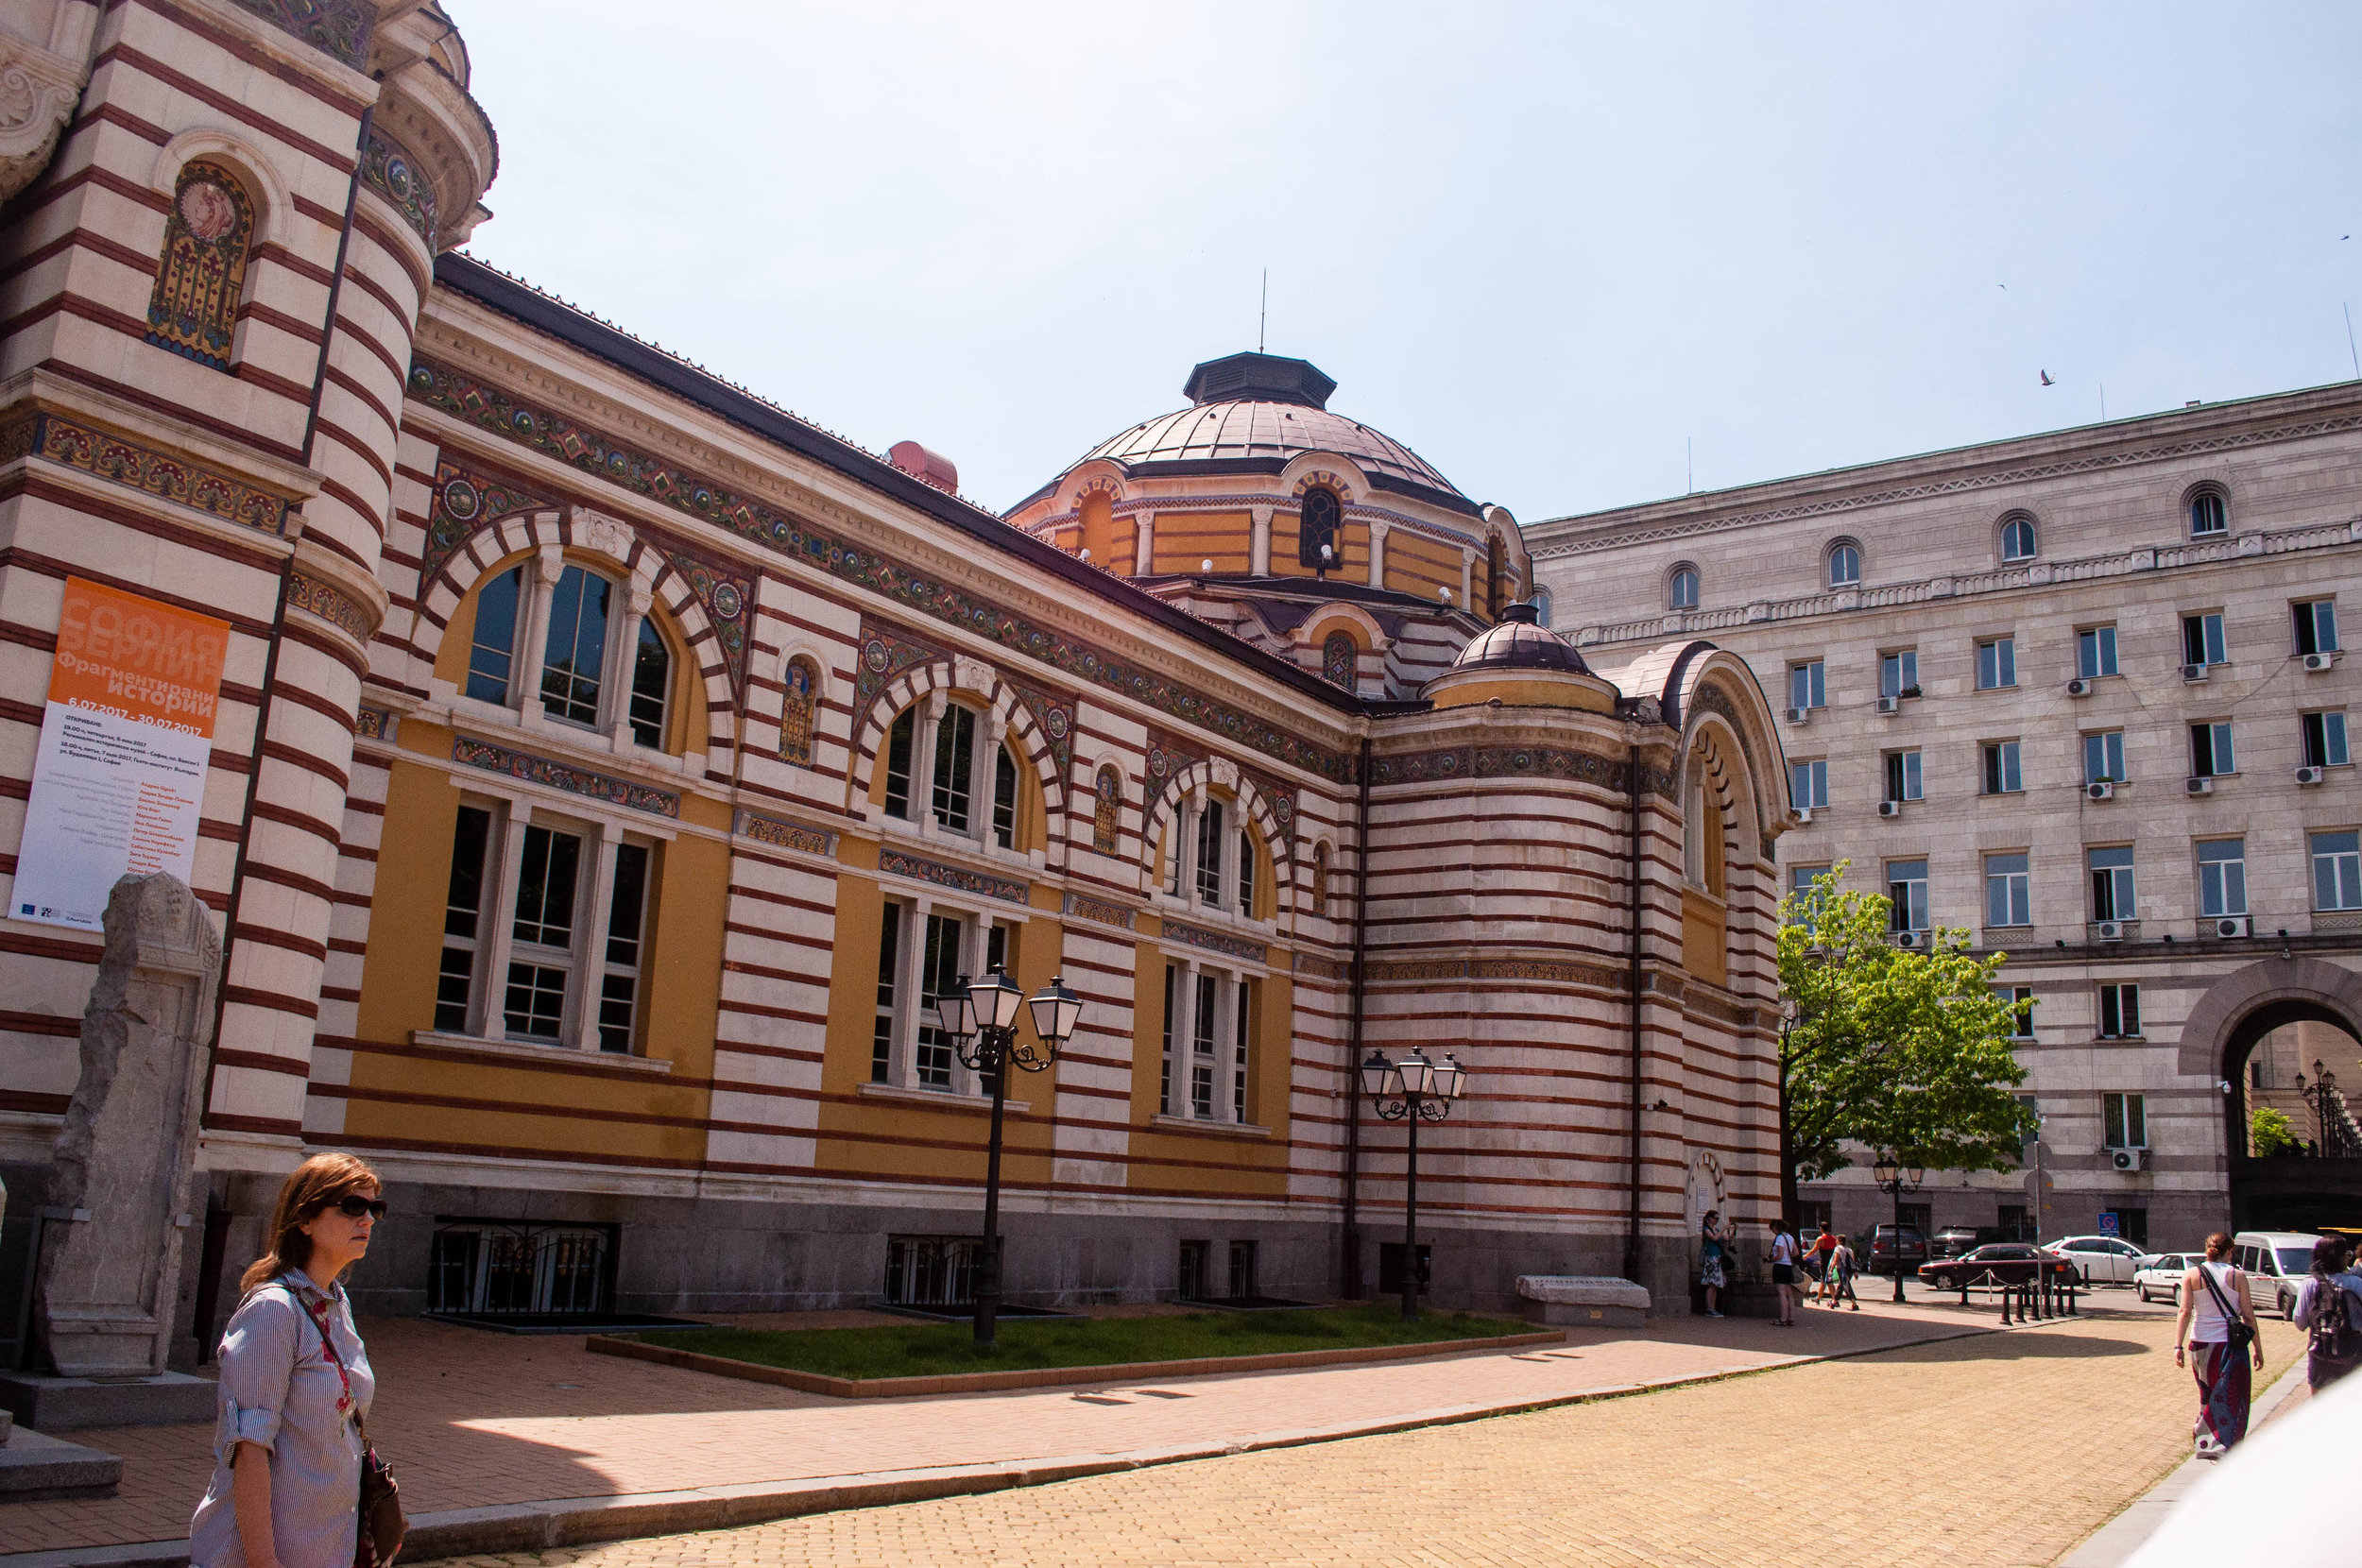 Serdika square buildings, this is one of the must-see in a 2-day itinerary in Sofia (Bulgaria)